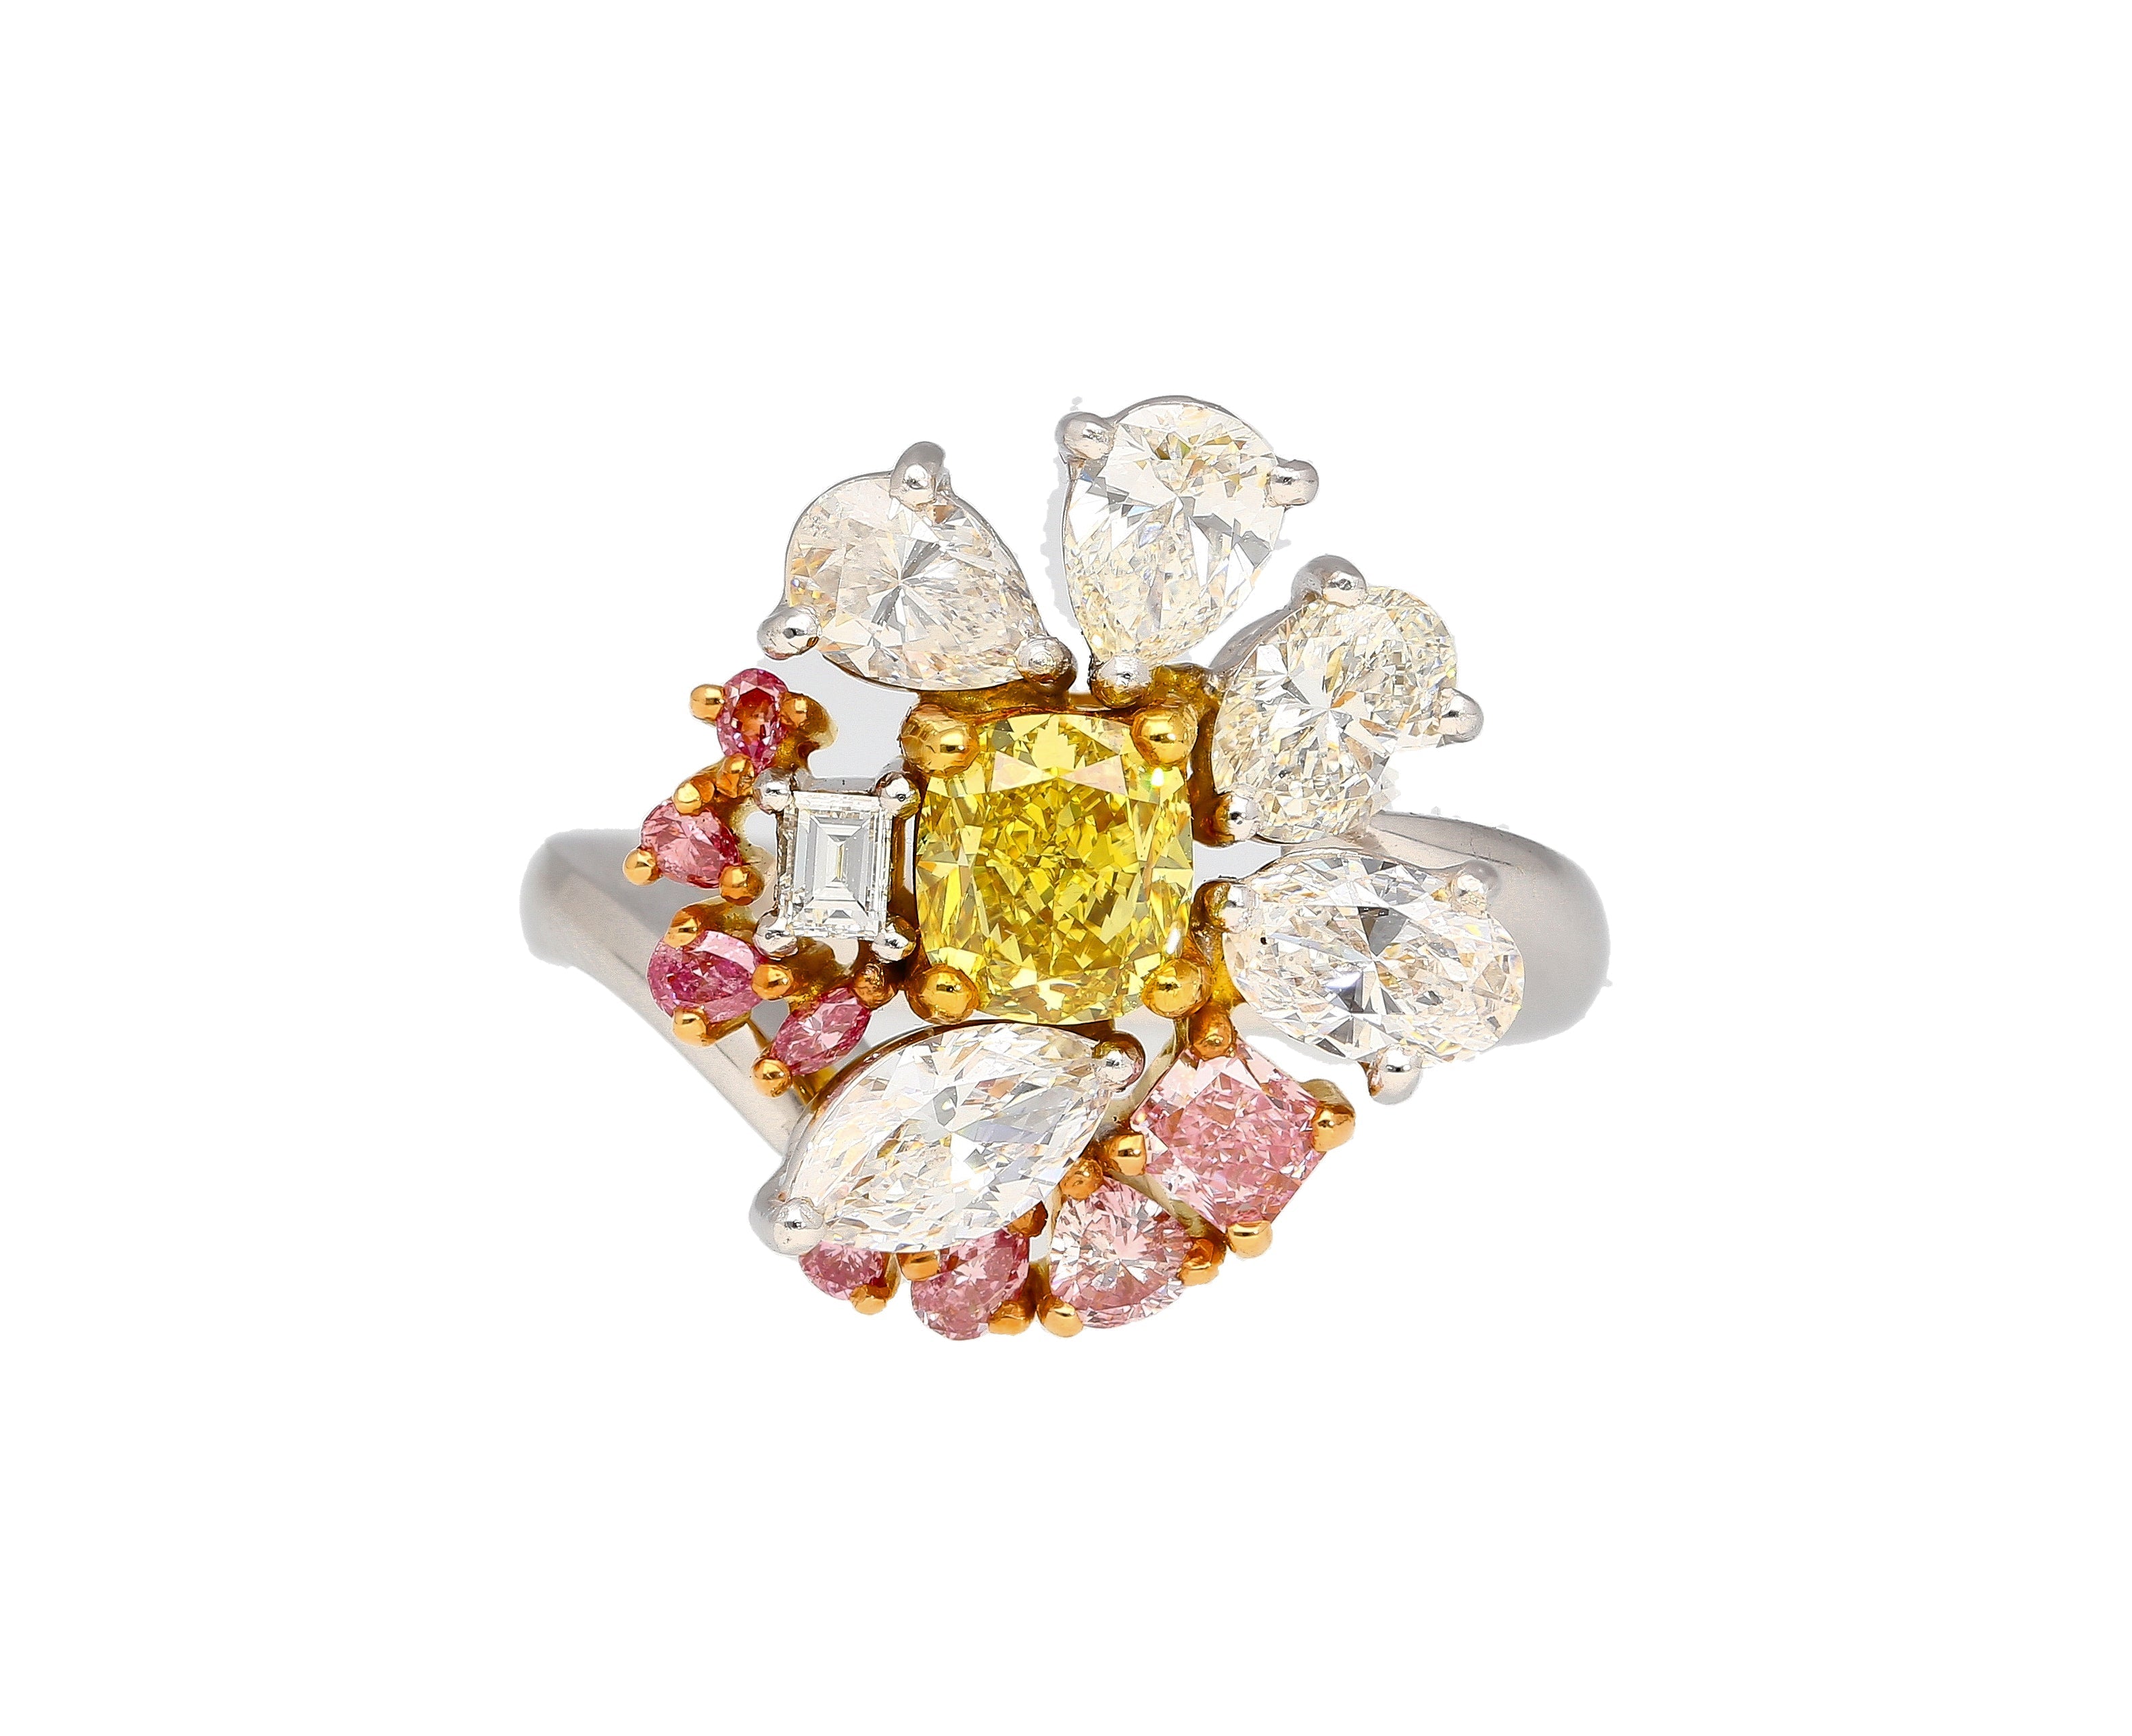 GIA-Certified-Fancy-Yellow-Cushion-Cut-Diamond-with-Pink-and-White-Diamond-Side-Stones-in-Platinum-950-18K-White-Gold-Rings.jpg